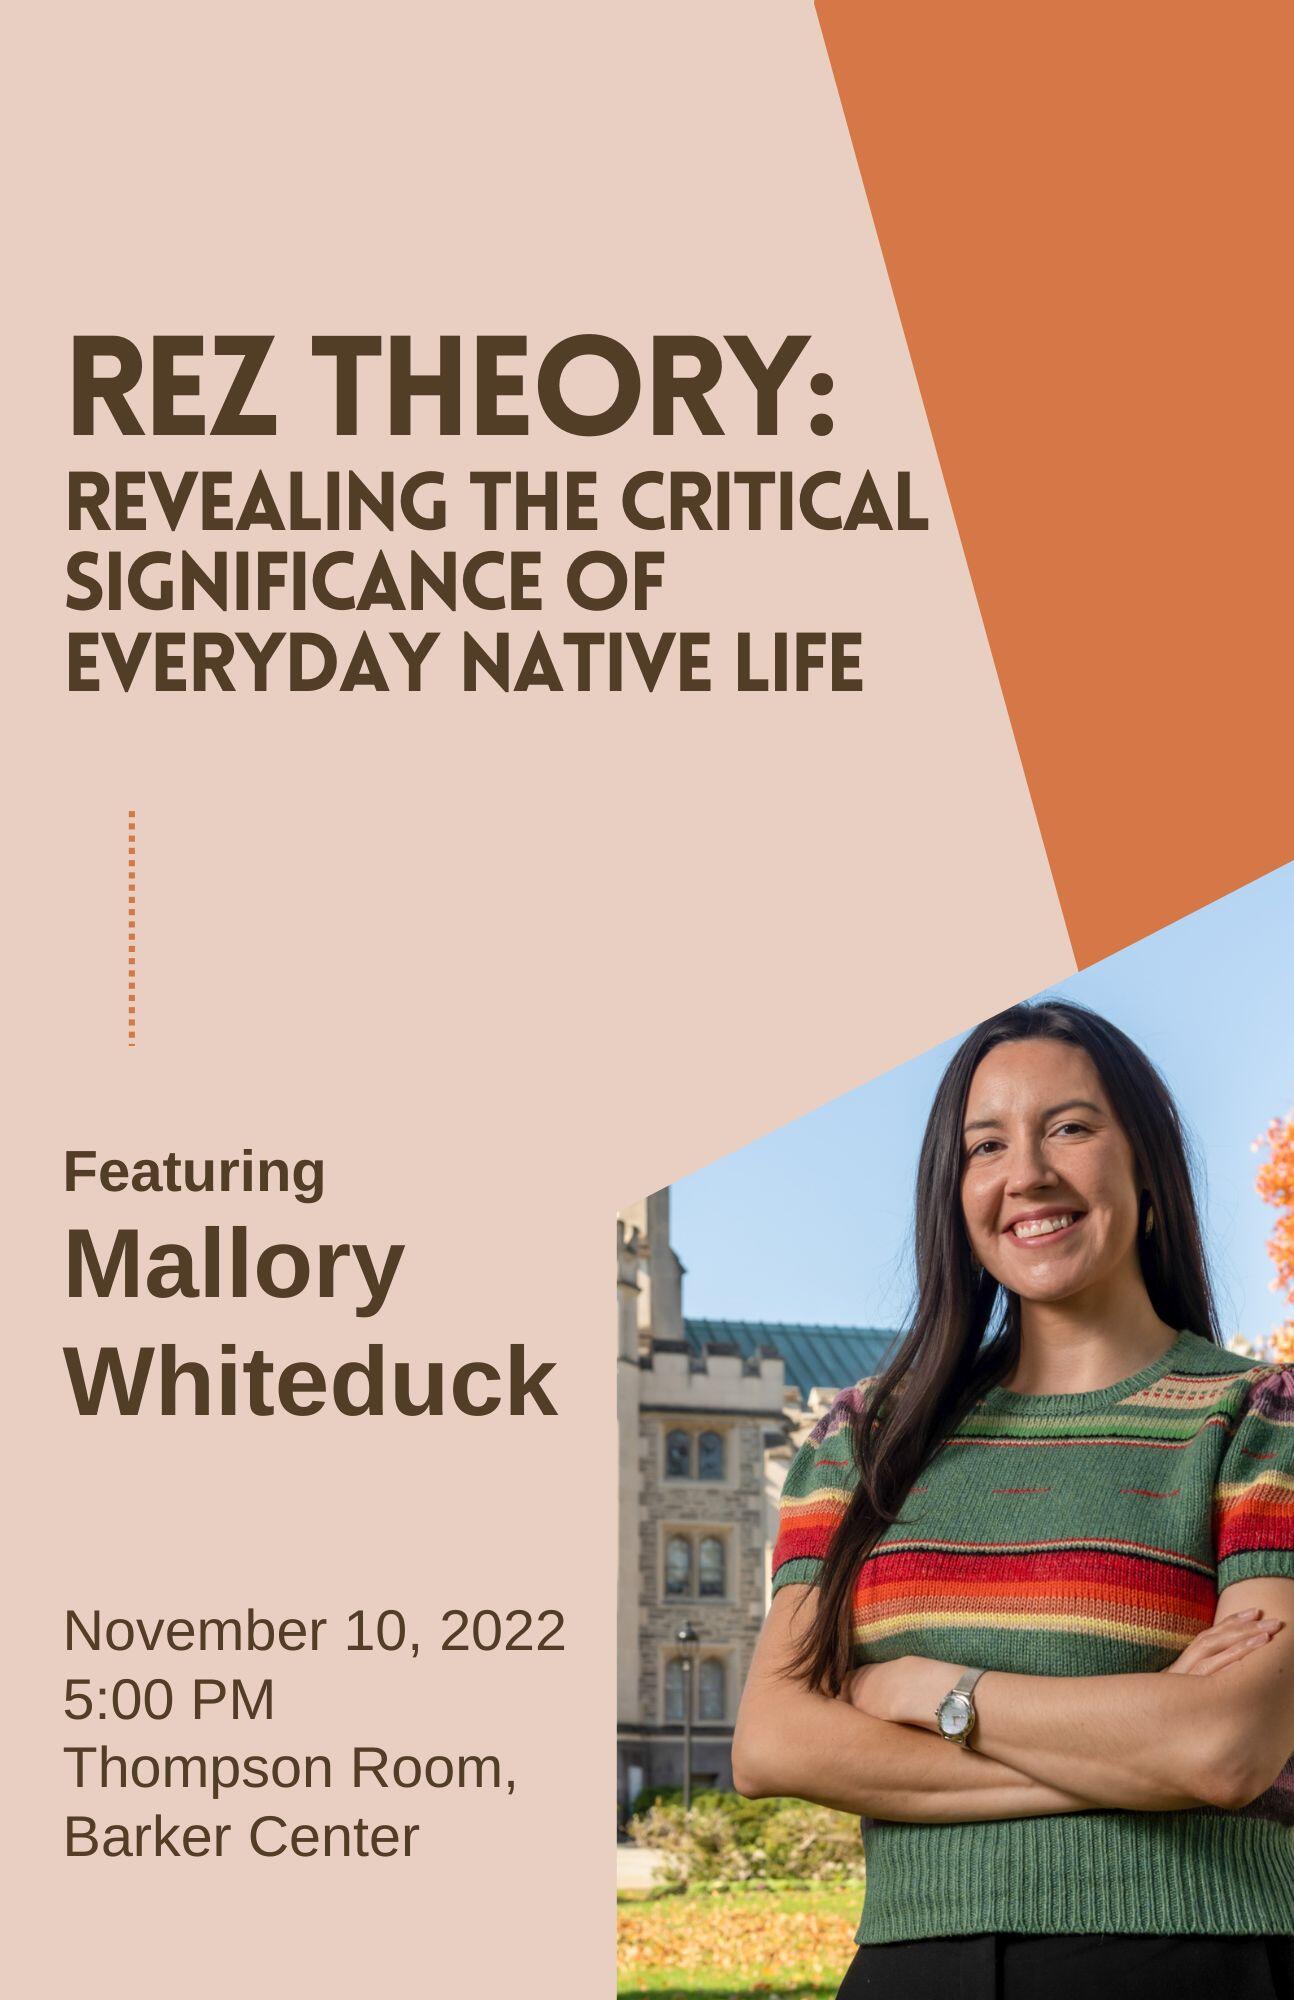 Event poster featuring a photo of Professor Mallory Whiteduck in a green shirt